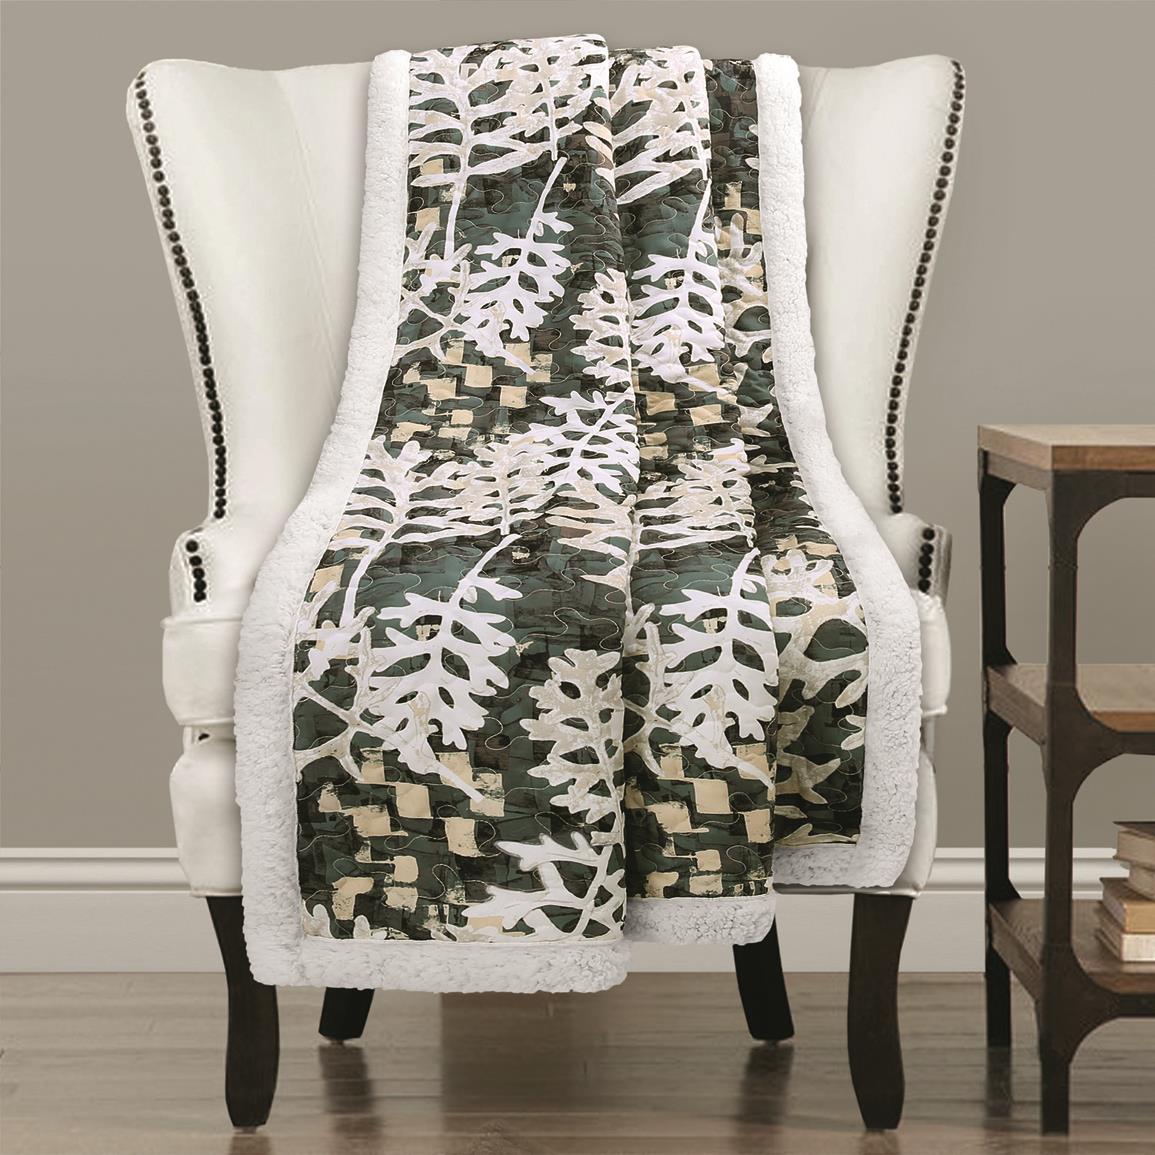 Lush Décor Camouflage Leaves Sherpa Throw Blanket